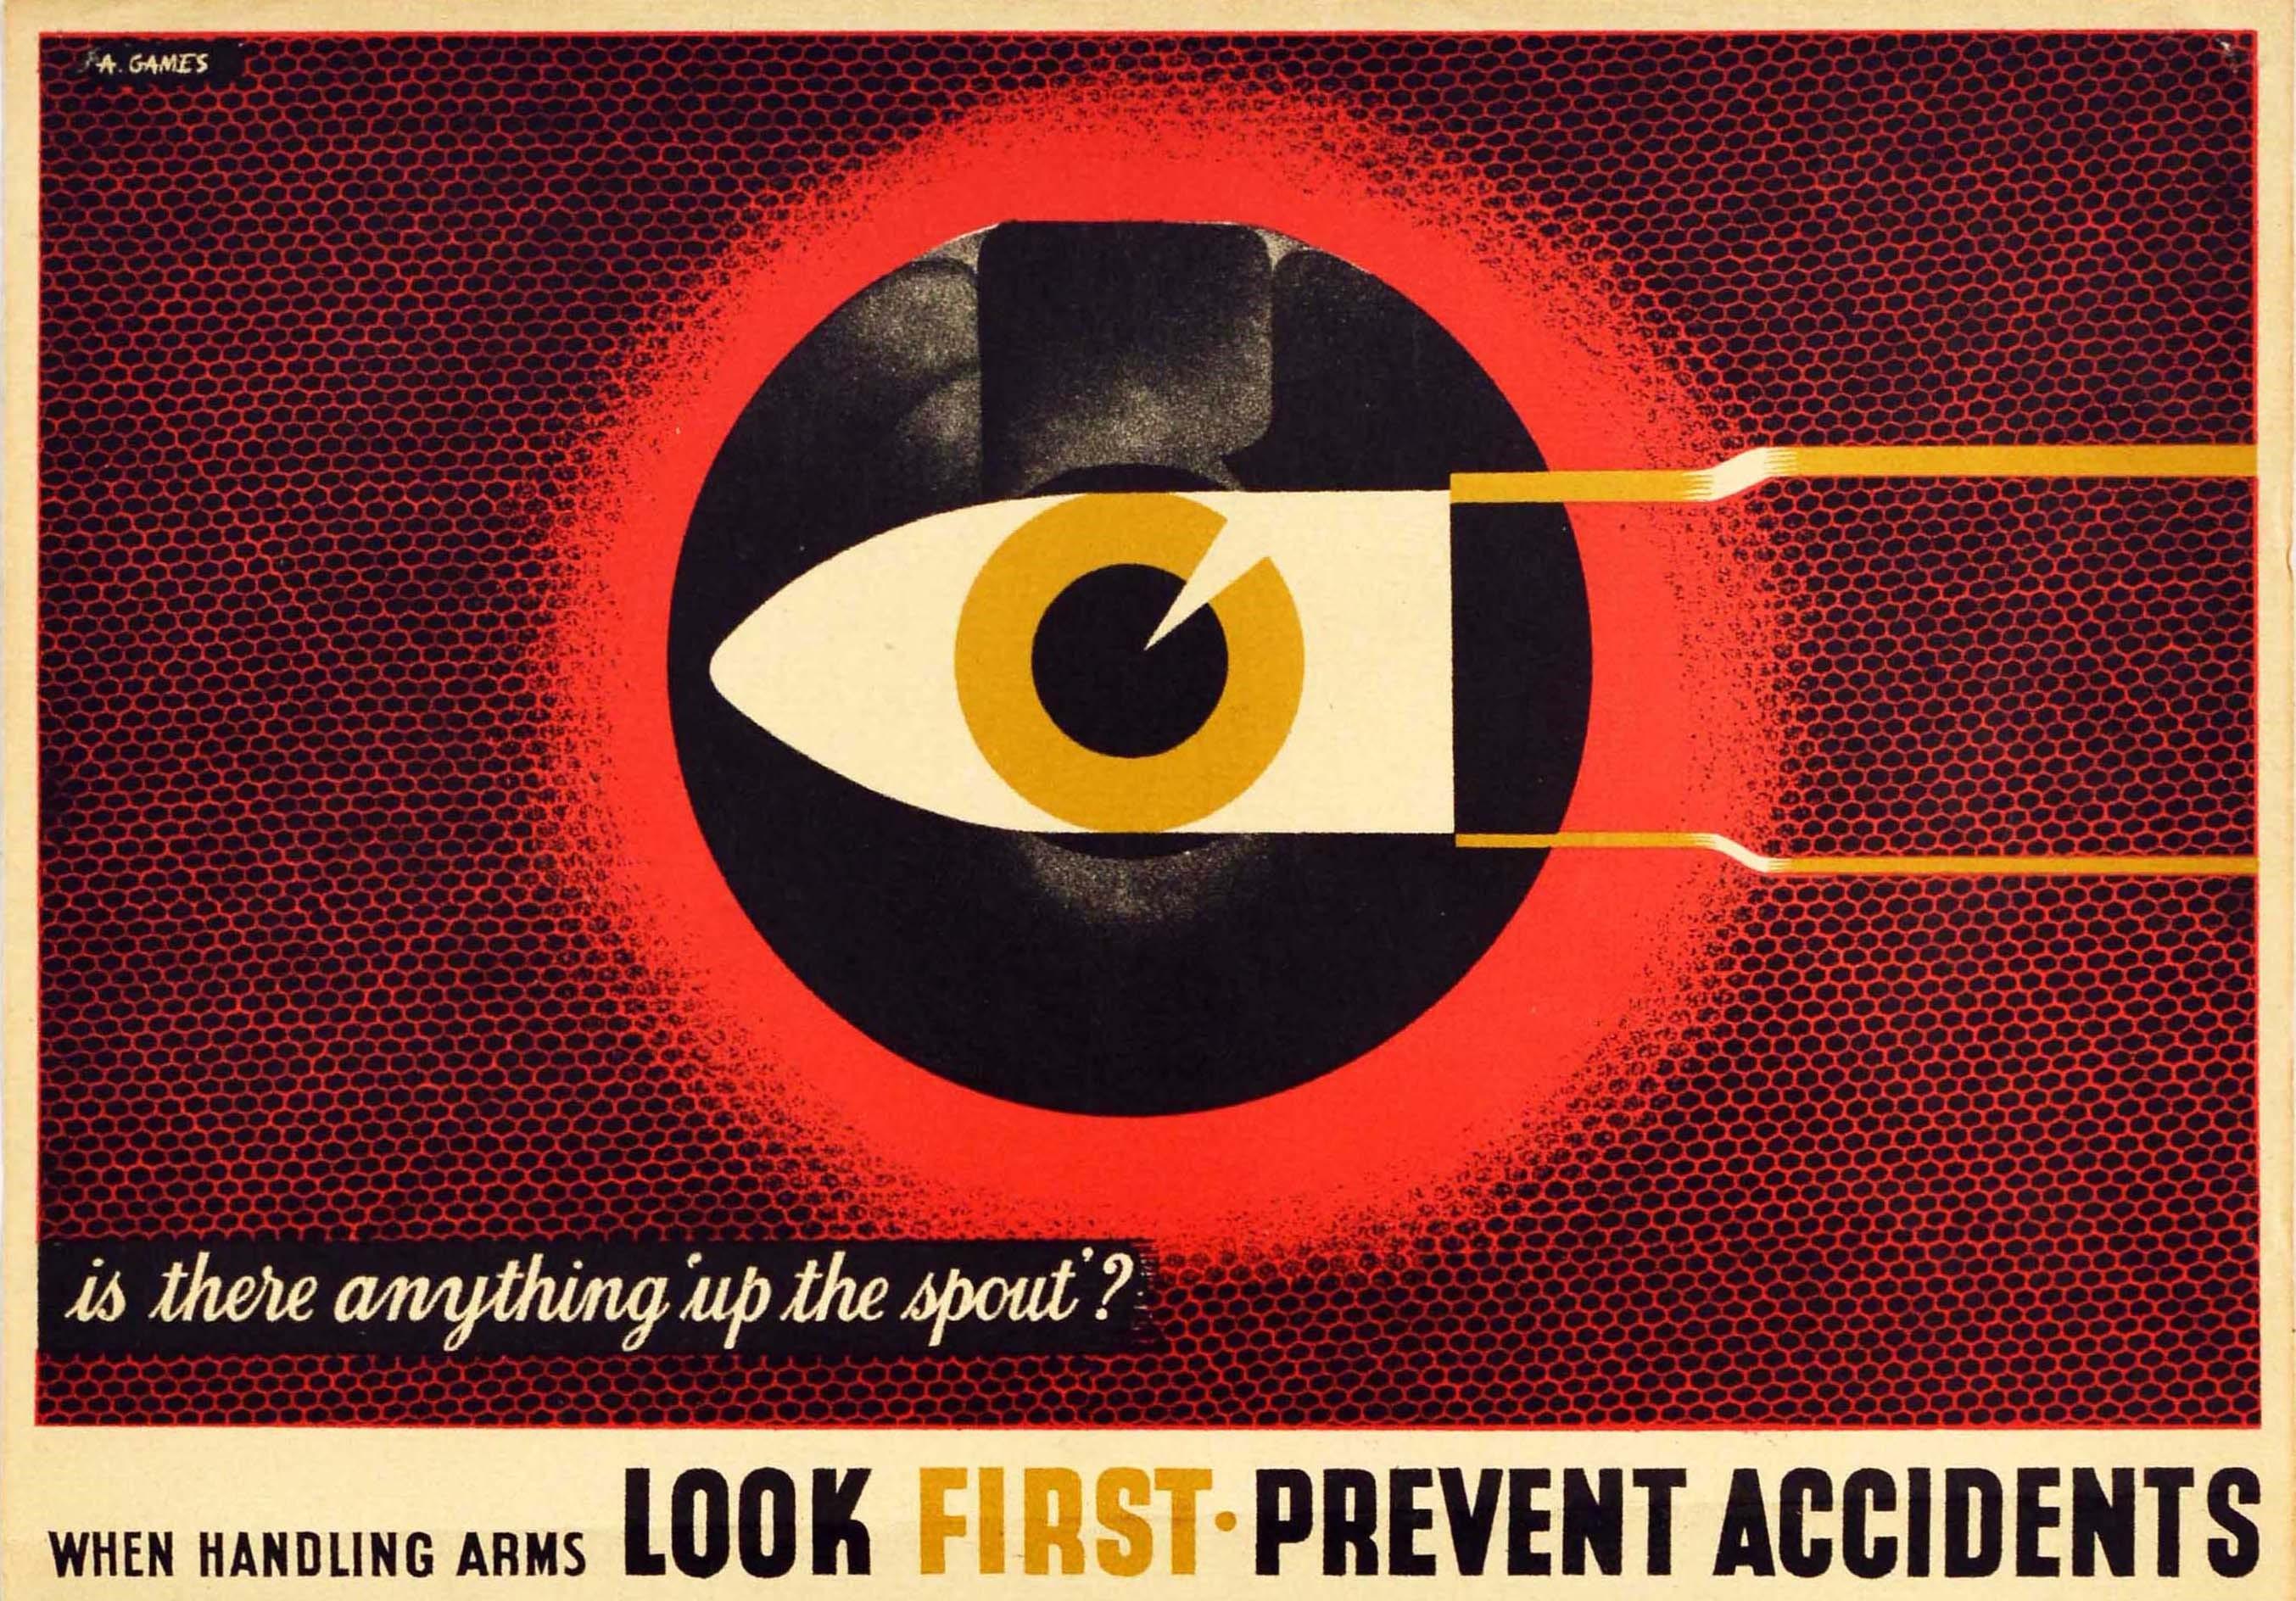 Original Vintage WWII Poster Look First Prevent Accidents Bullets Graphic Design - Print by Abram Games